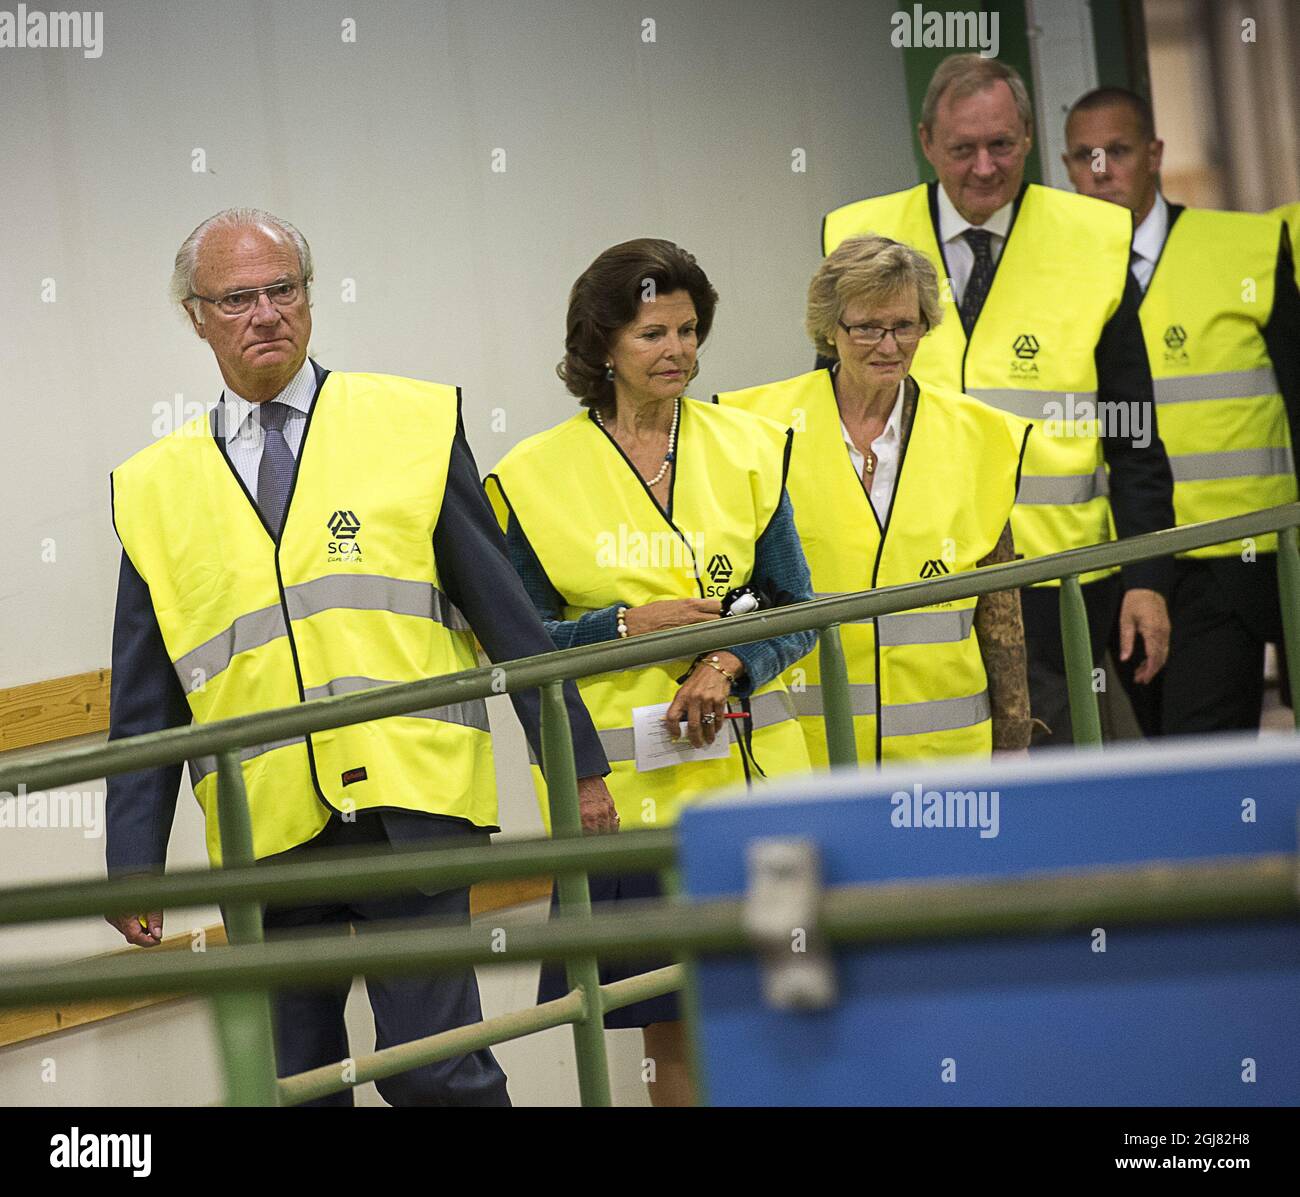 HARNOSAND 2013-08-14 King Carl Gustaf and Queen Silvia are seen during their visit to the city of Harnosand, north Sweden, August 14, 2013. Here pictured dui ring a visit to the SCA sawmill plant. The visit is a part of the KingÂ’s 40 year anniversary on the throne. Foto Jonas Ekstromer / SCANPIX kod 10030  Stock Photo